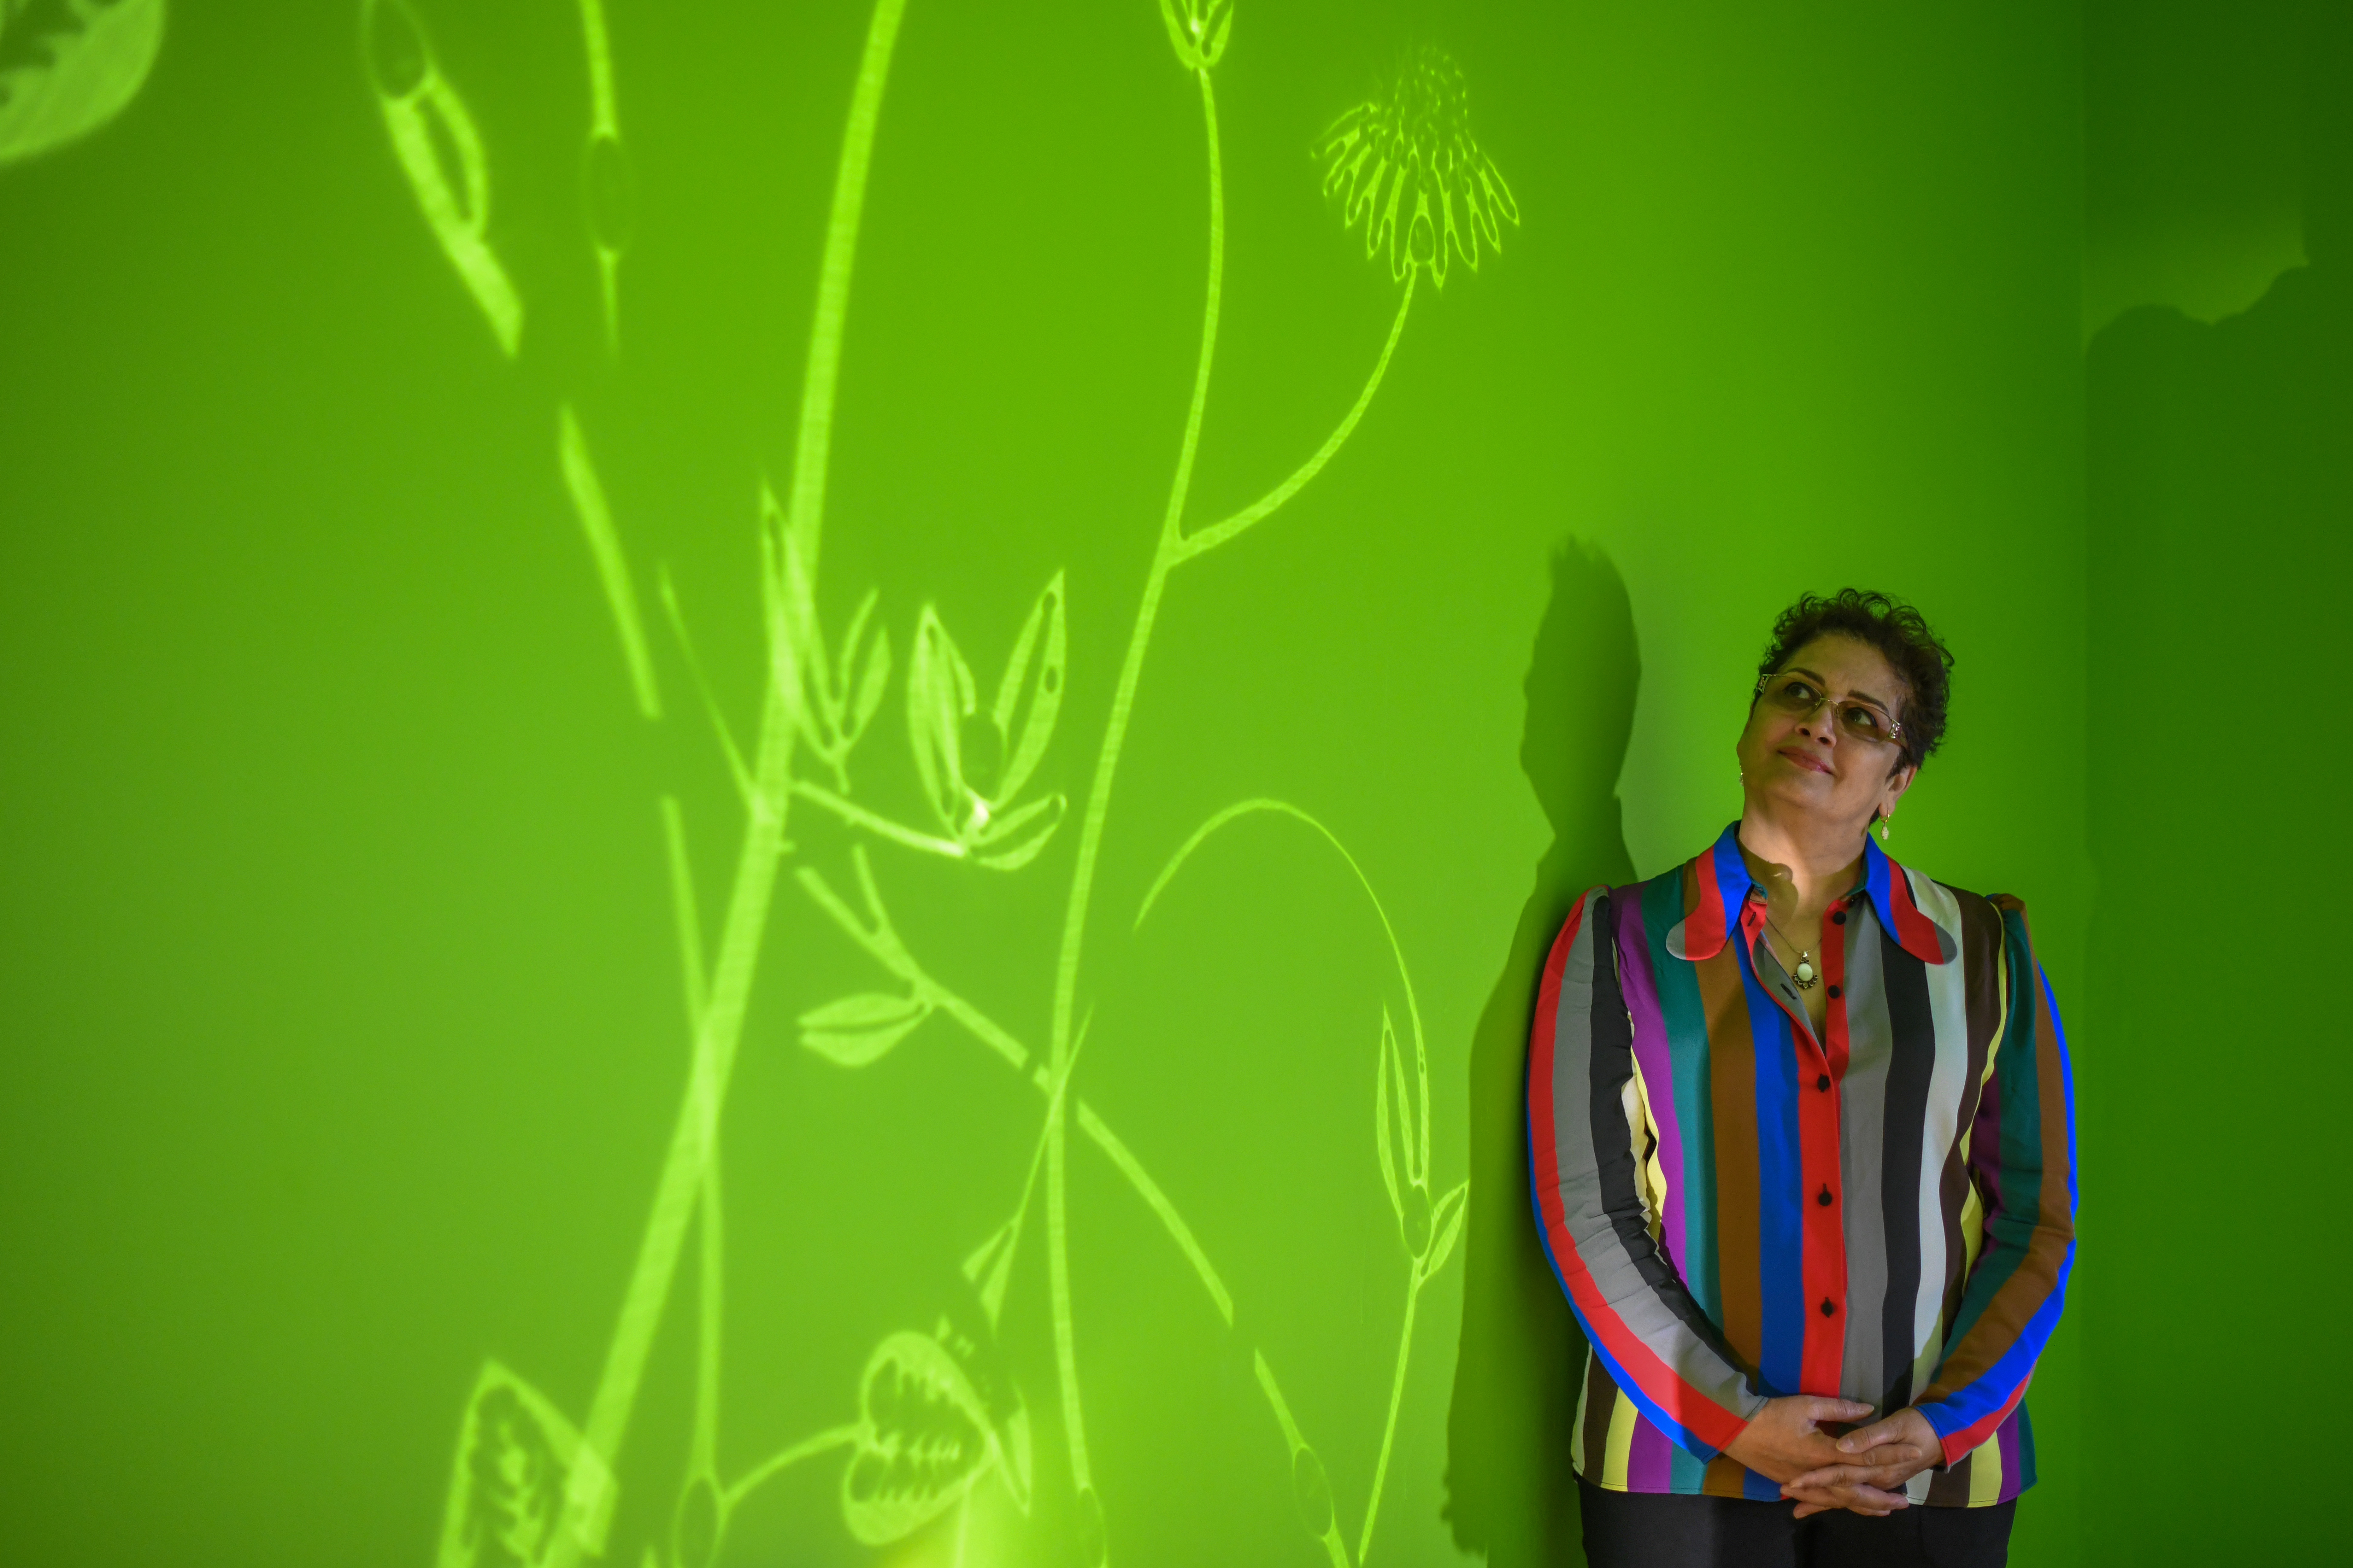 A woman with dark cropped hair and a striped blouse stands gazing at a shimmering reflection of plant and flower shapes on a bright green wallwall